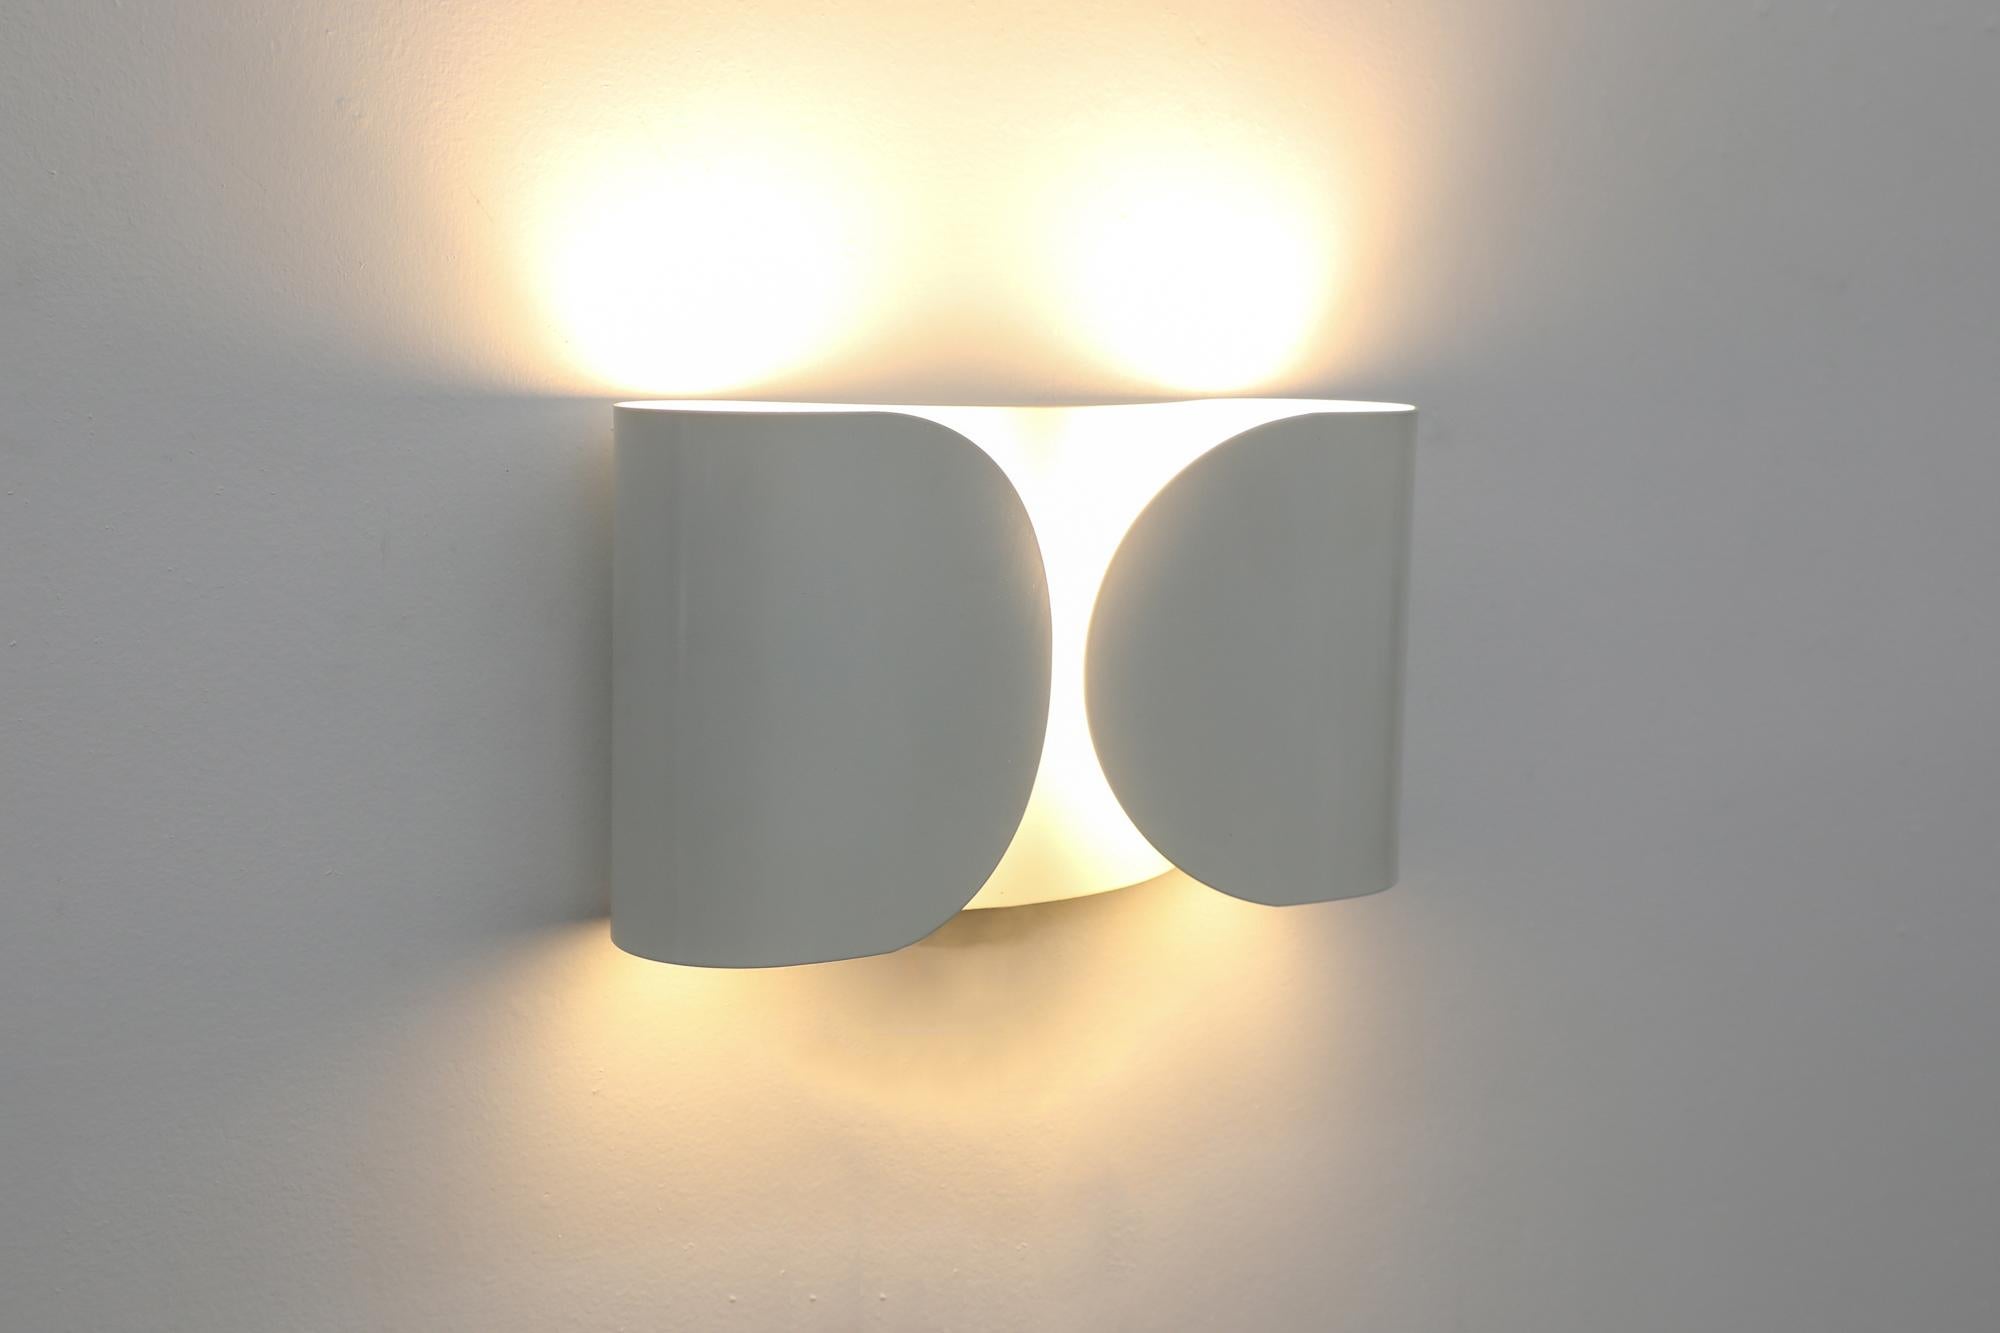 Enameled Original Mid-Century White TS-Foglio Wall Lamps by Tobia Scarpa for Flos, 1960s For Sale